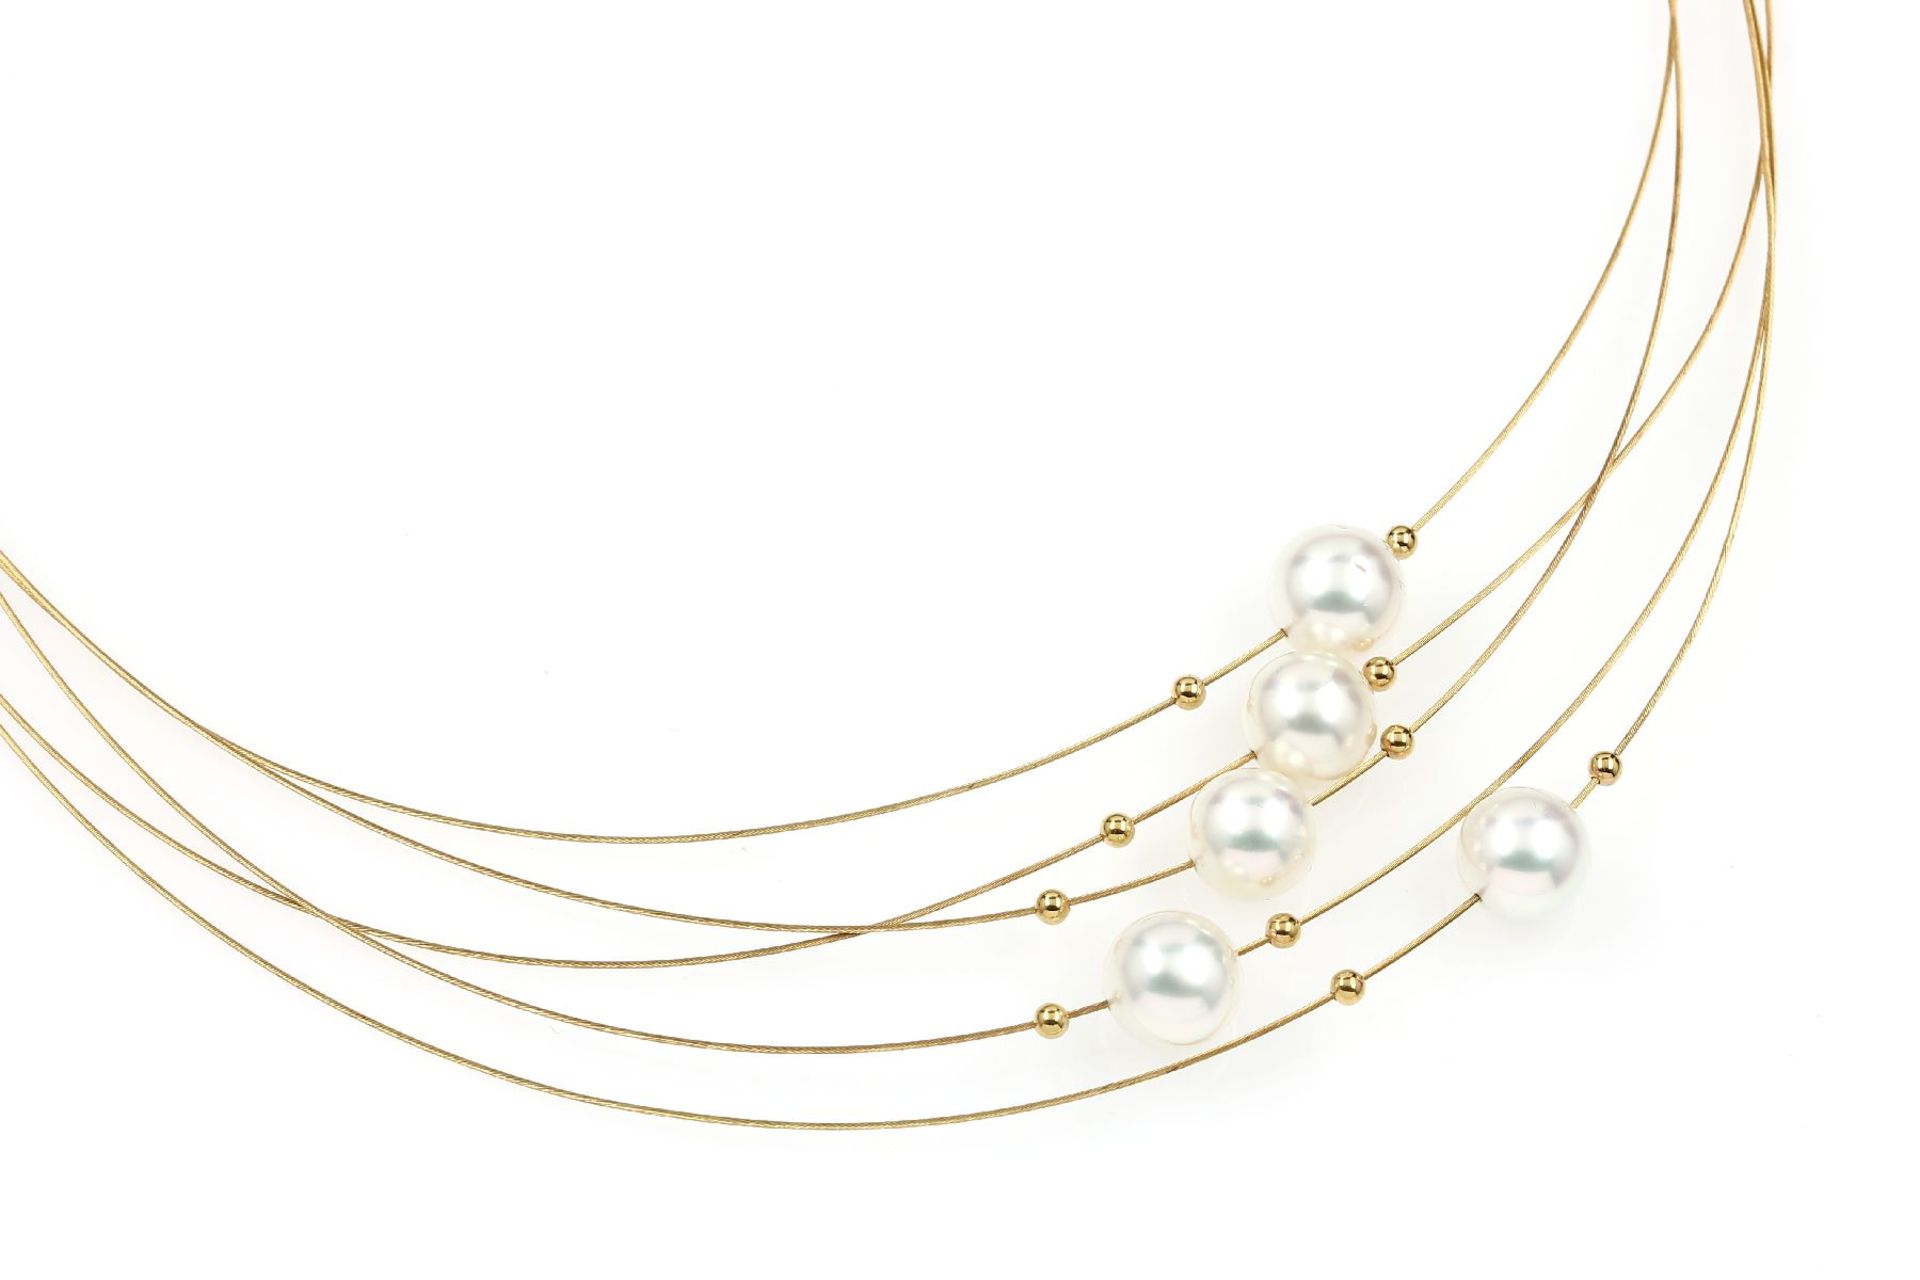 5-rowed 18 kt gold necklace with south seas pearls, YG 750/000, 5 white cultured south seas pearls